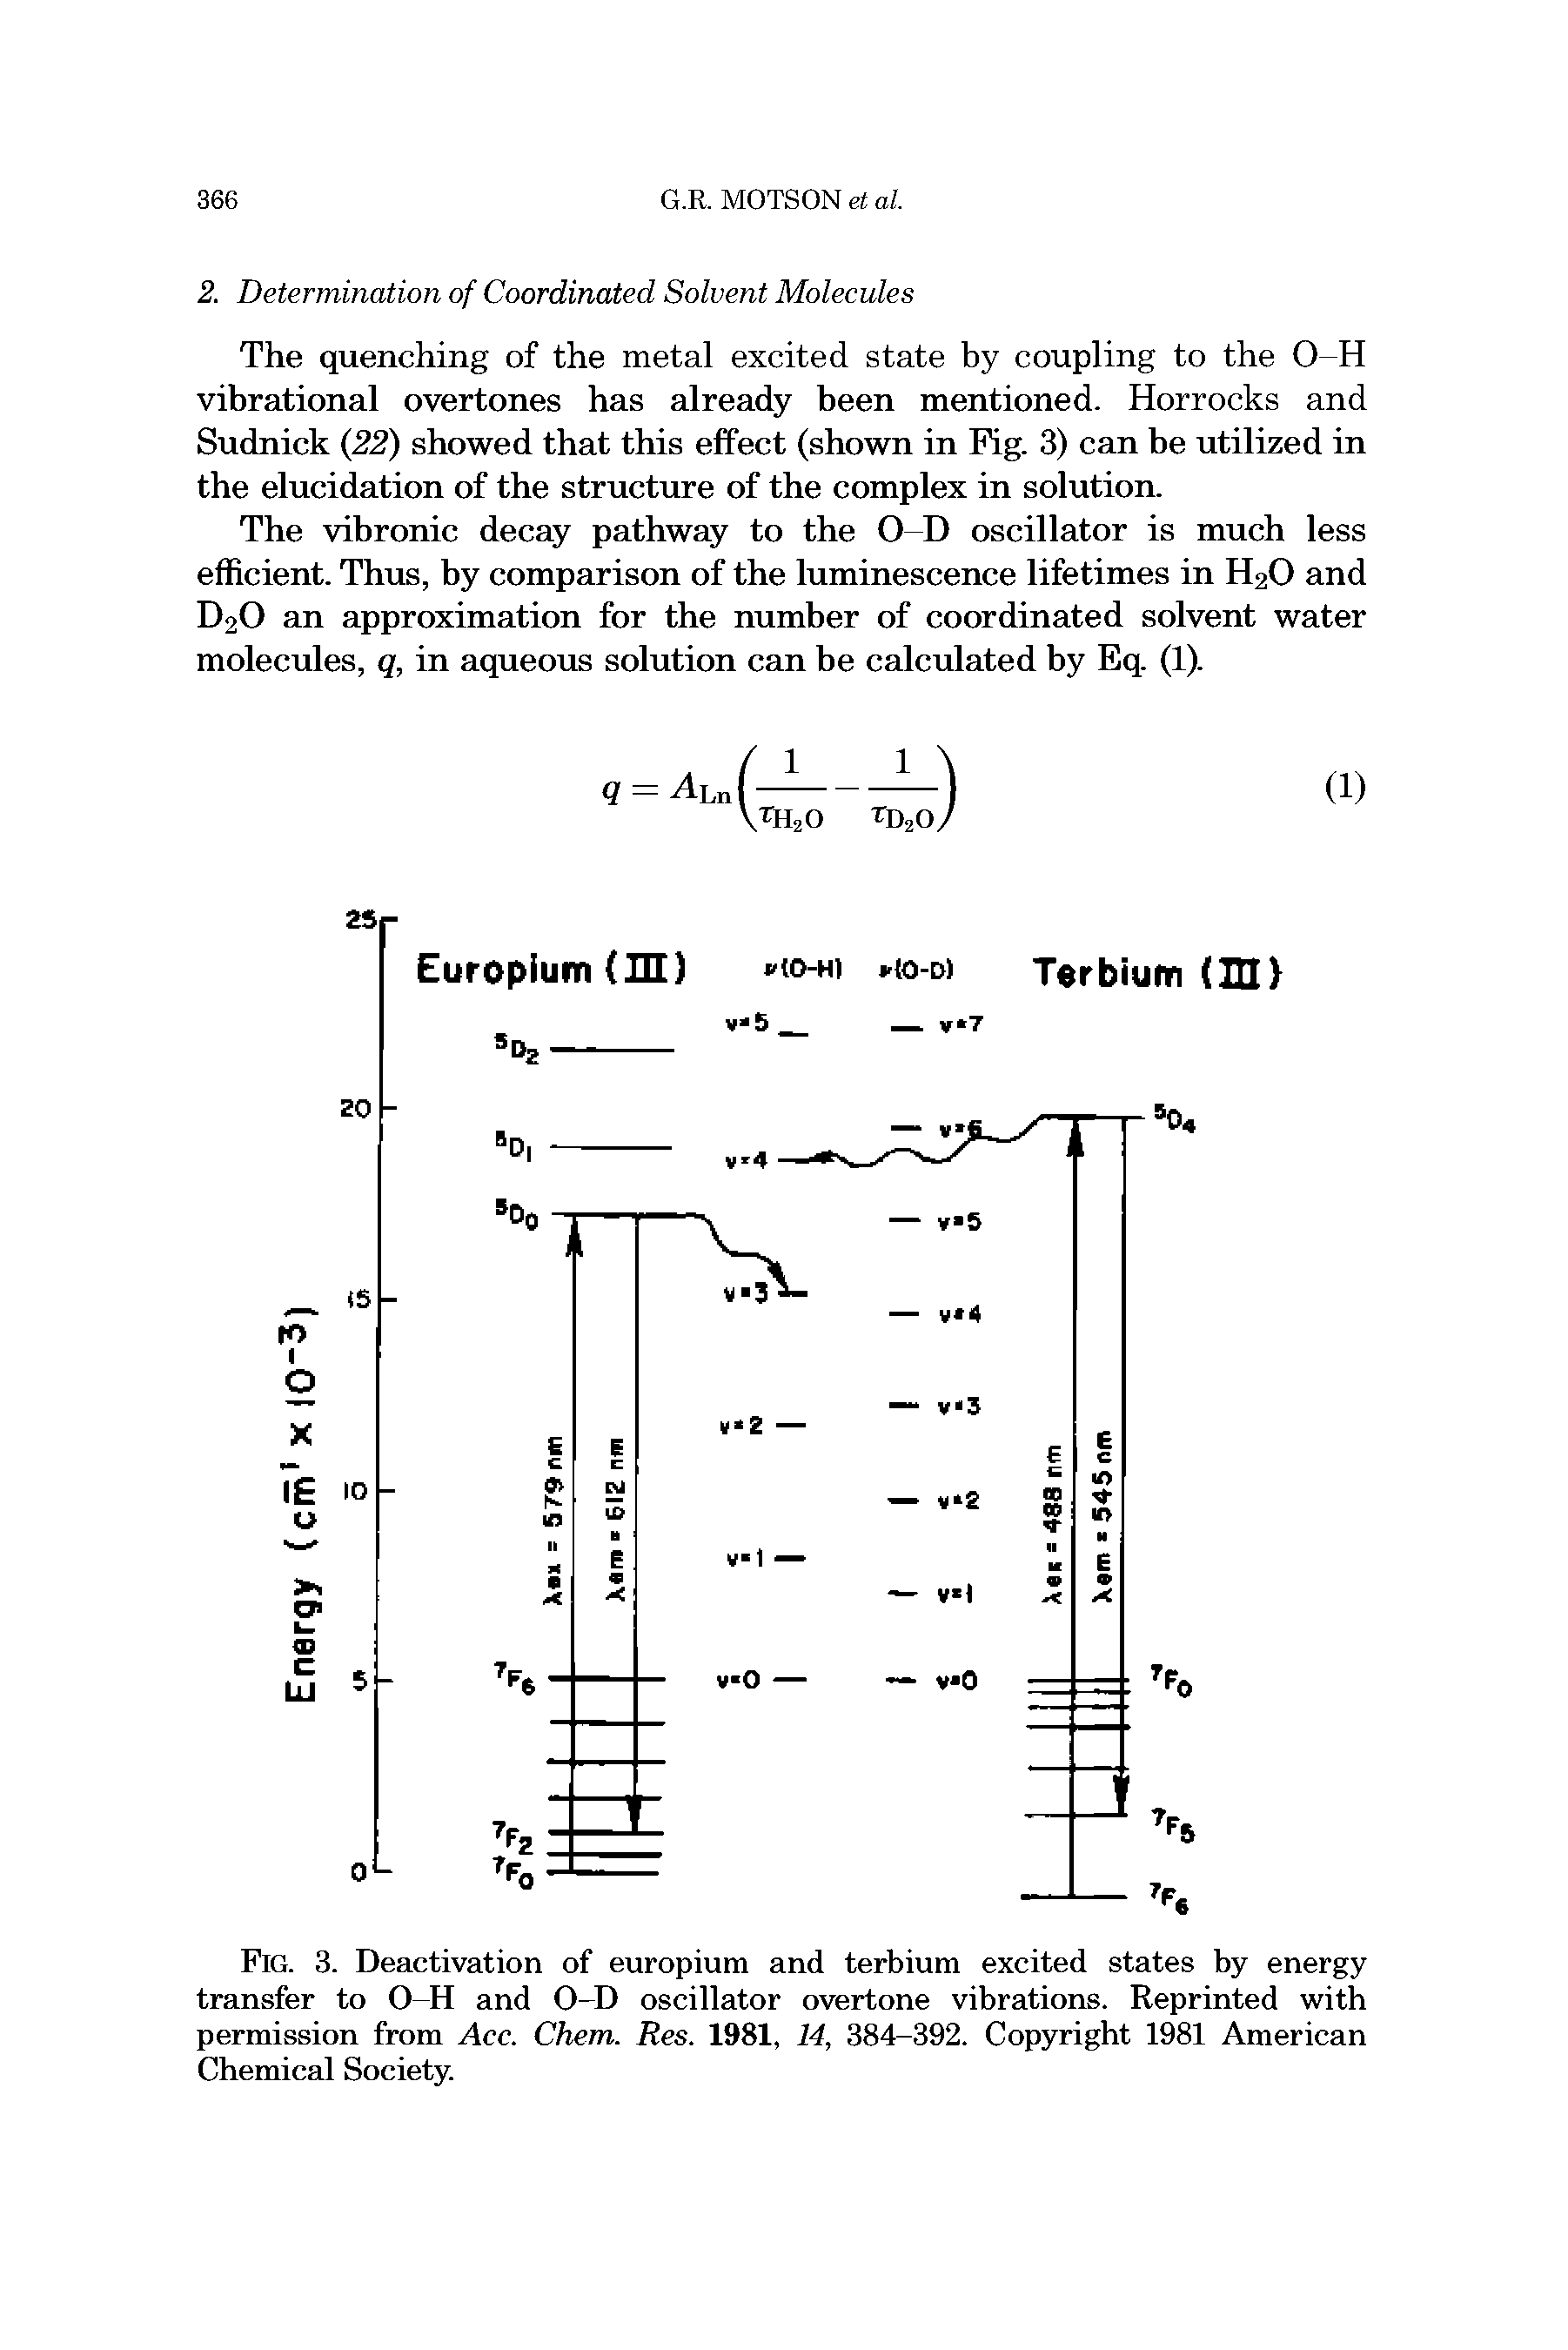 Fig. 3. Deactivation of europium and terbium excited states by energy transfer to O-H and O-D oscillator overtone vibrations. Reprinted with permission from Acc. Chem. Res. 1981, 14, 384-392. Copyright 1981 American Chemical Society.